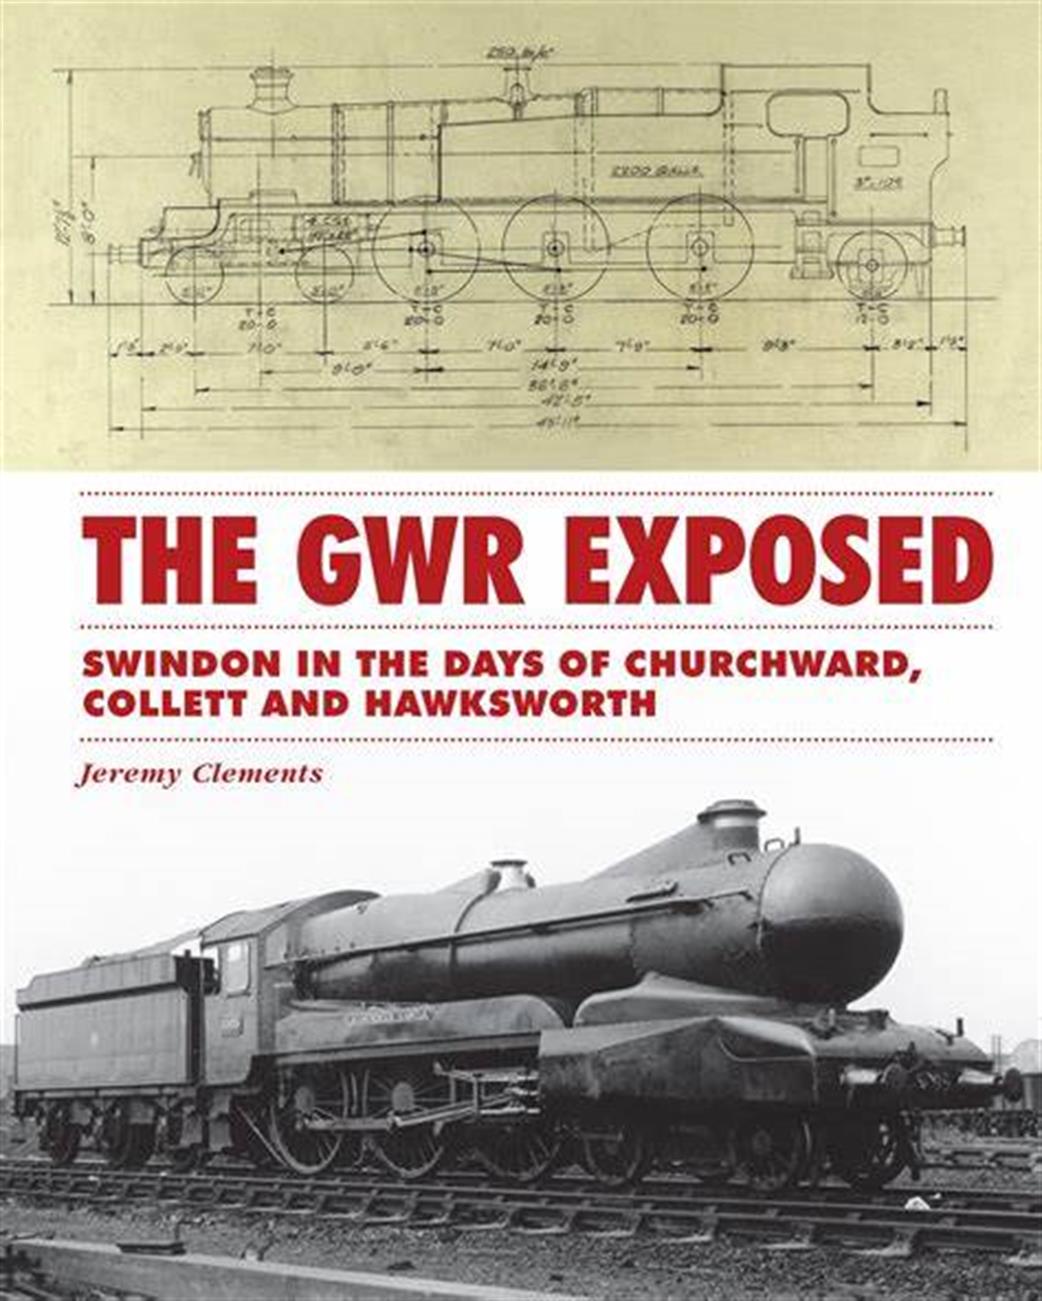 9780860936664 The GWR Exposed Book By Jeremy Clements